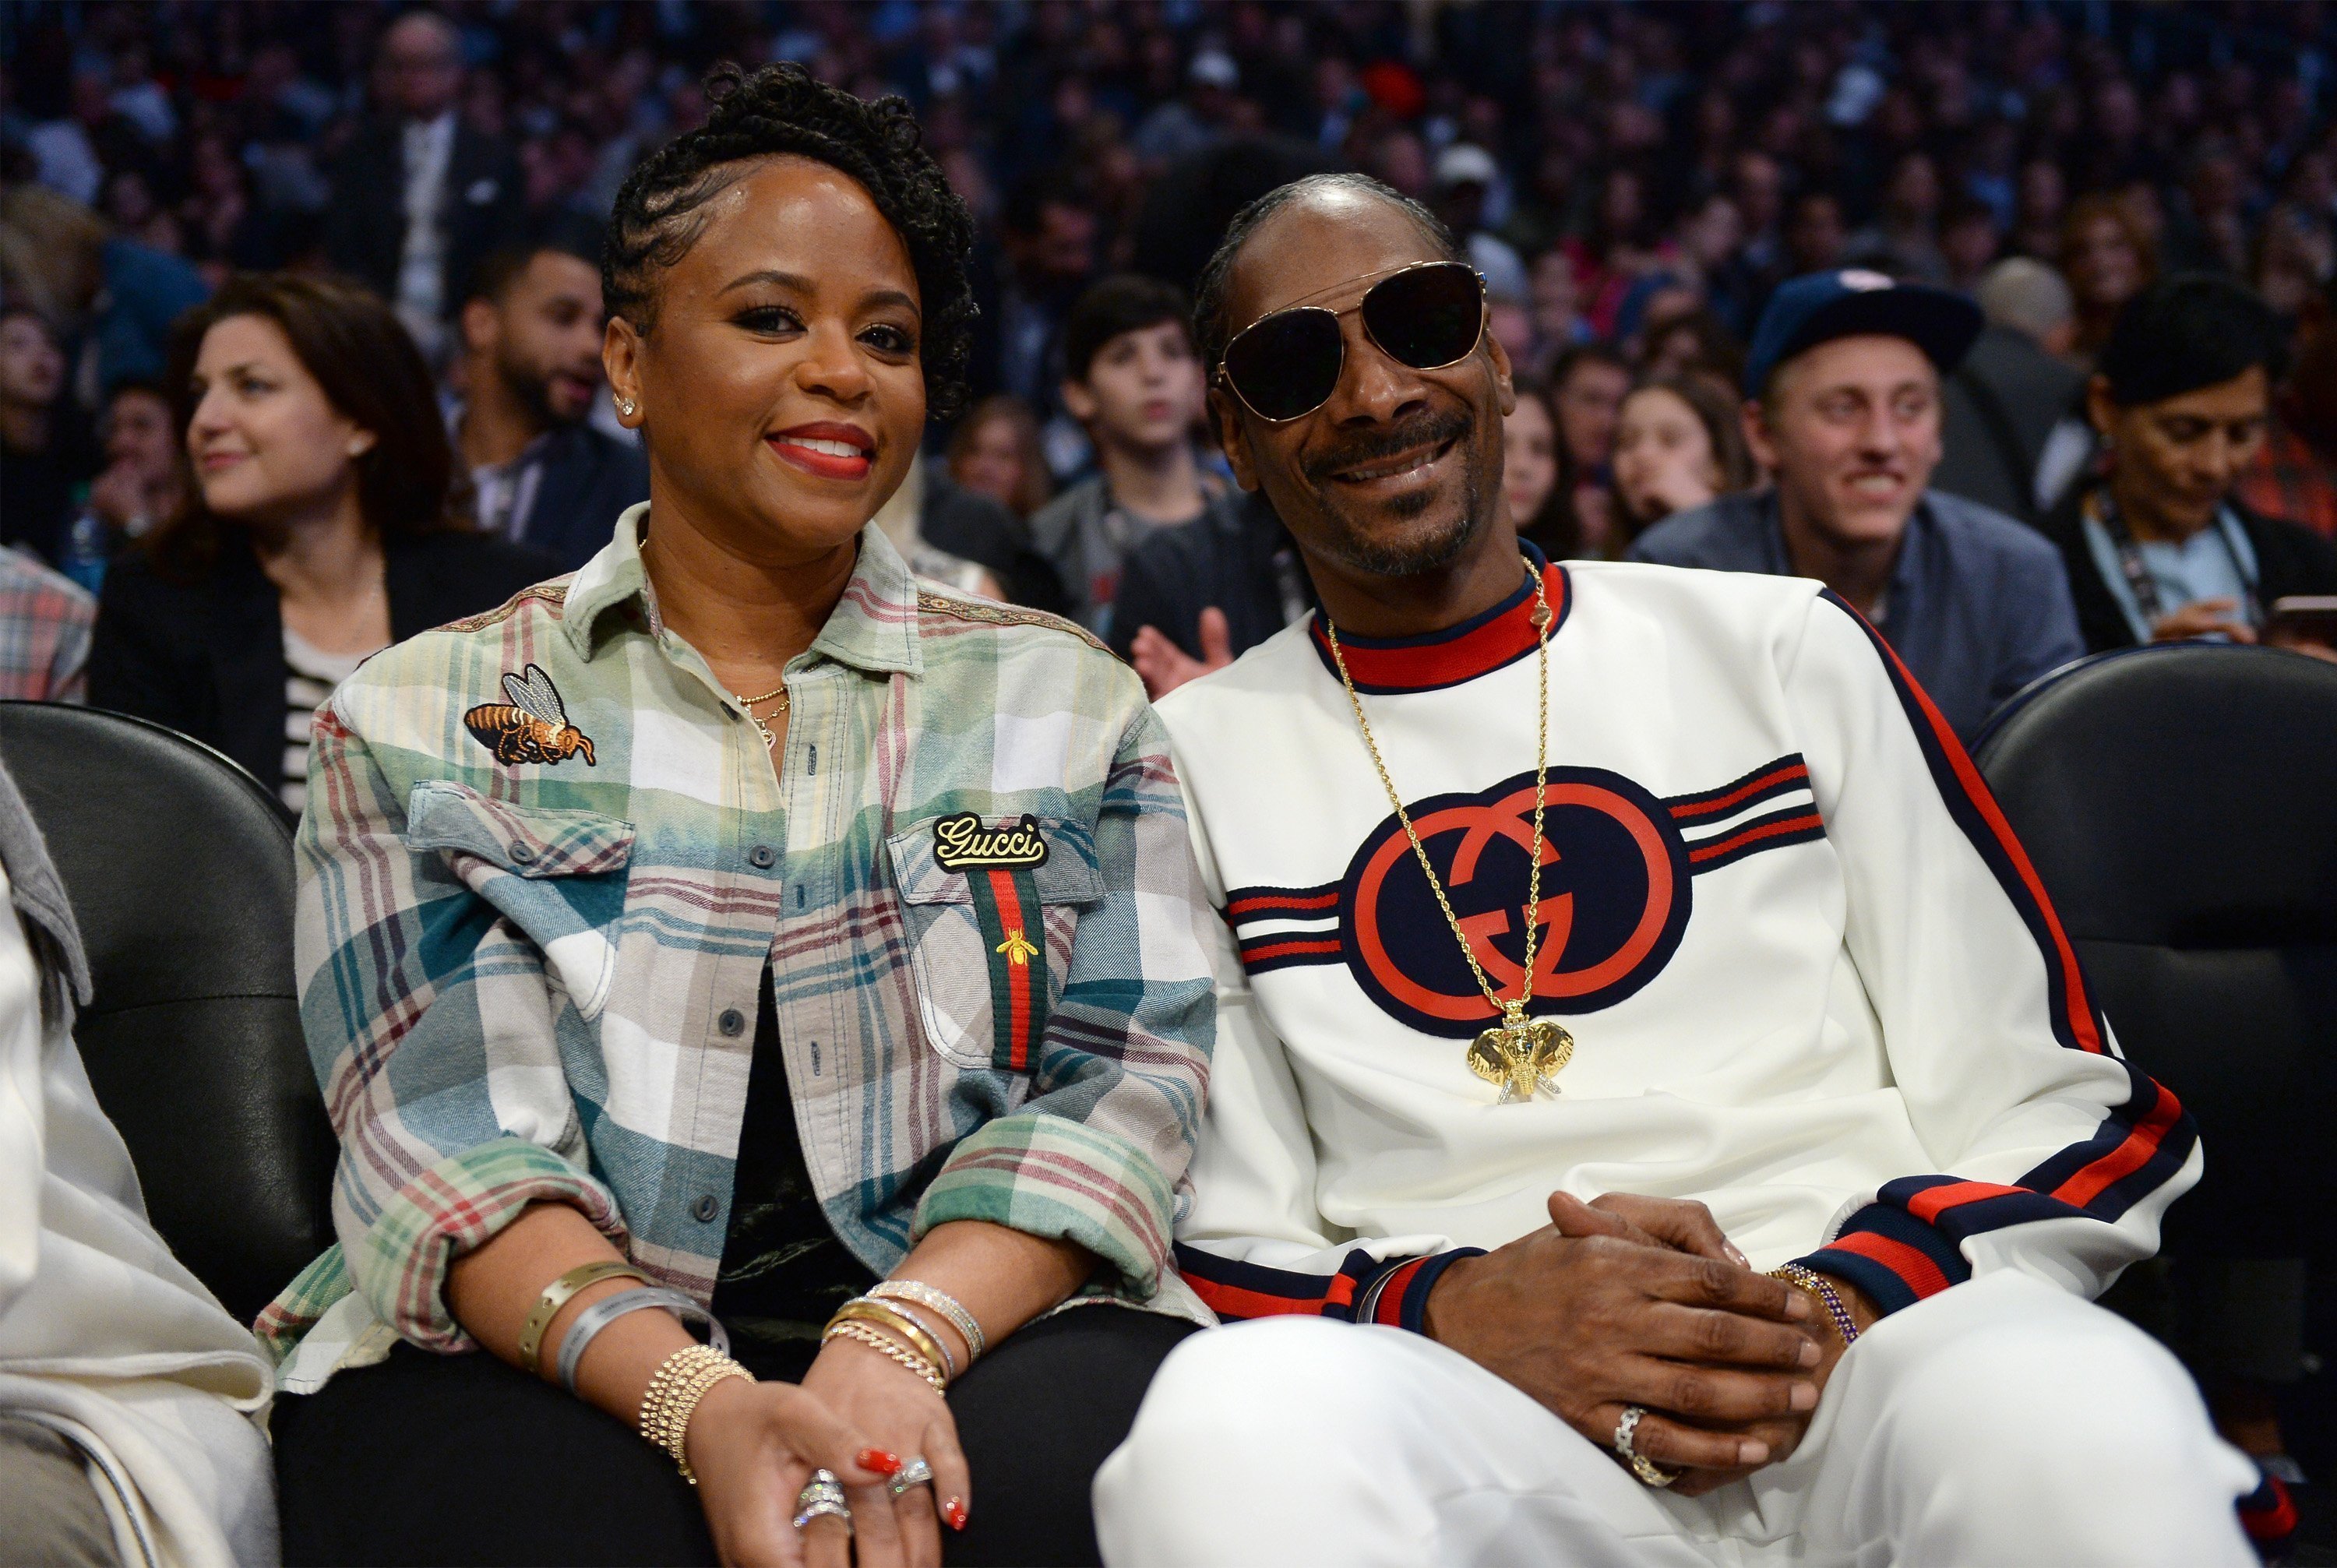 Snoop Dogg and wife Shante attend the NBA All-Star Game 2018 at Staples Center on February 18, 2018, | Photo: GettyImages